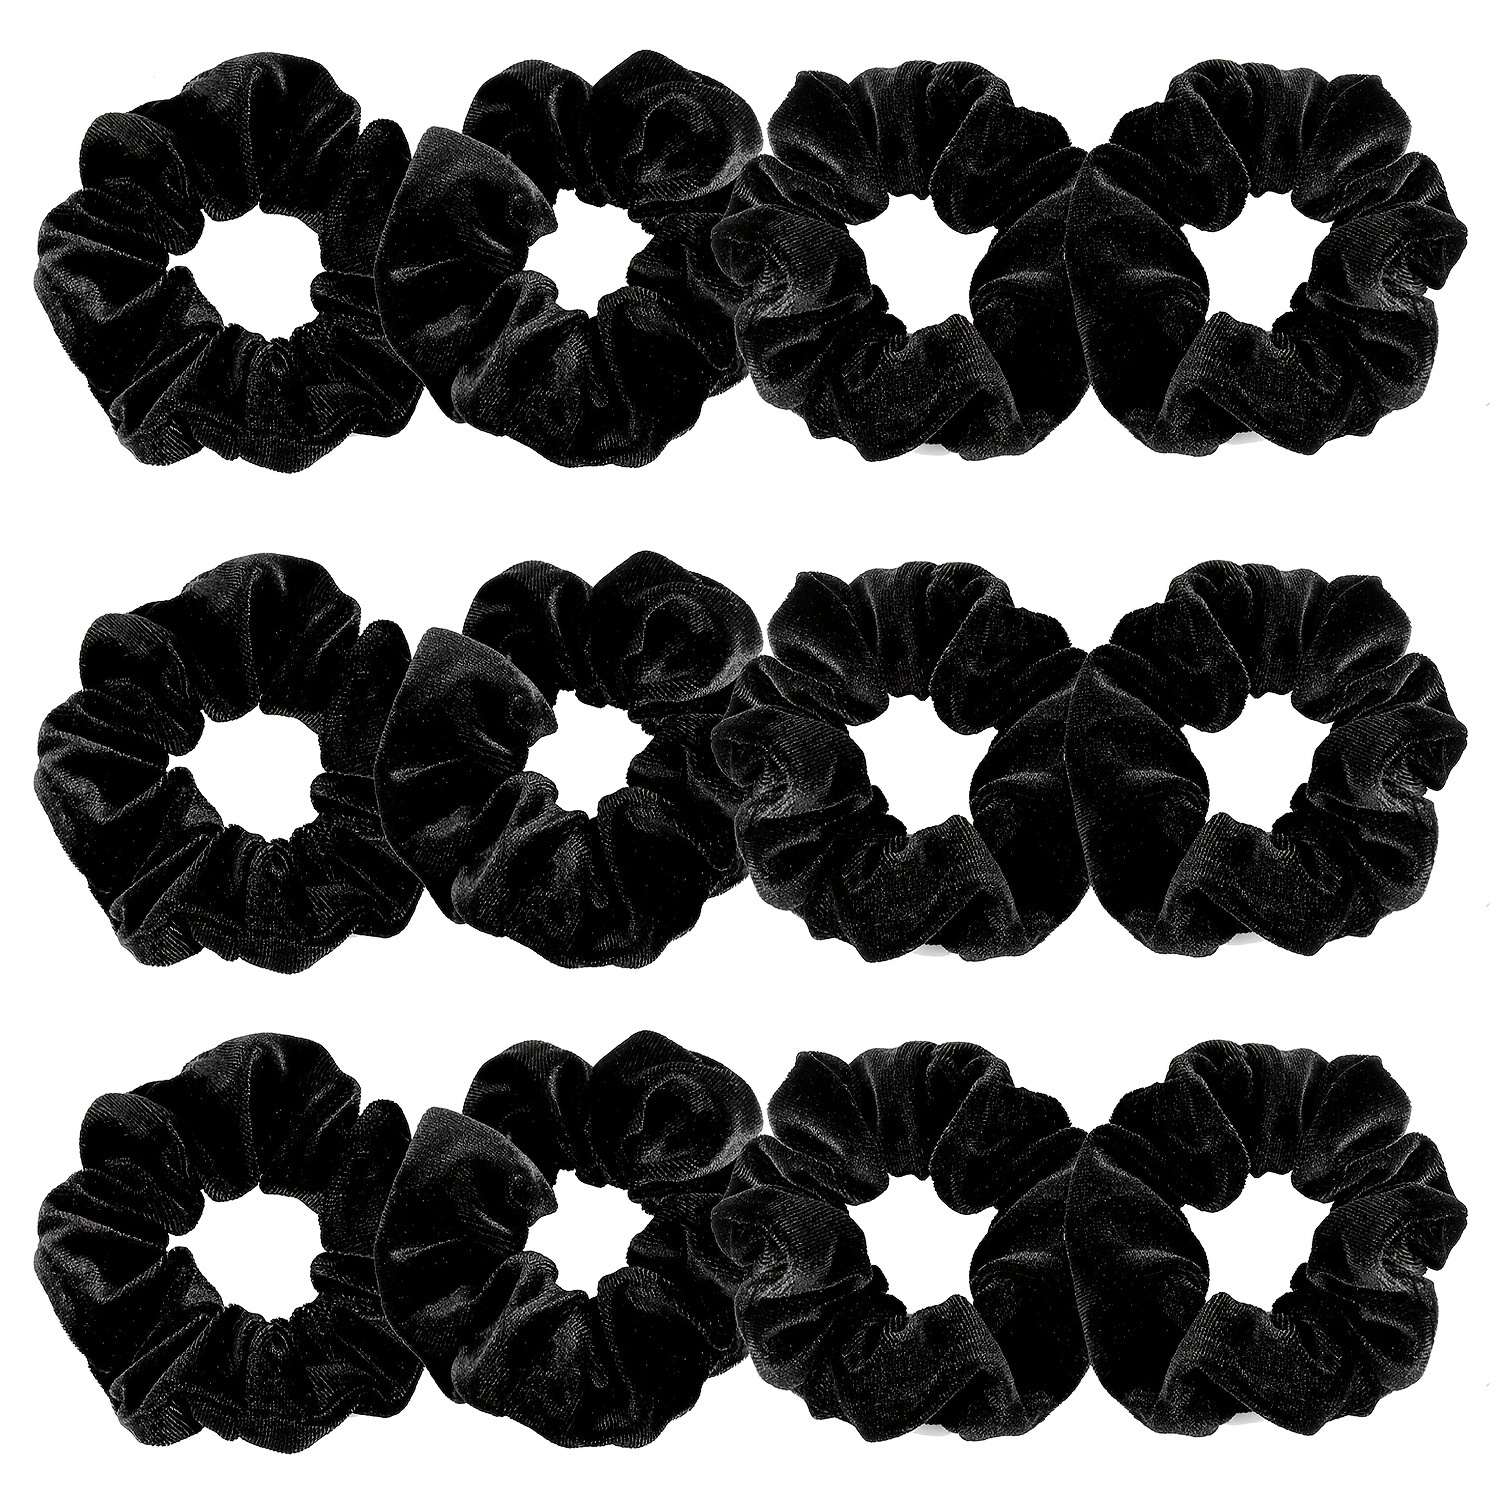 

12pcs Soft And Stylish Black Velvet Hair Scrunchies - Perfect For Ladies' Hair Ties And Bobbles